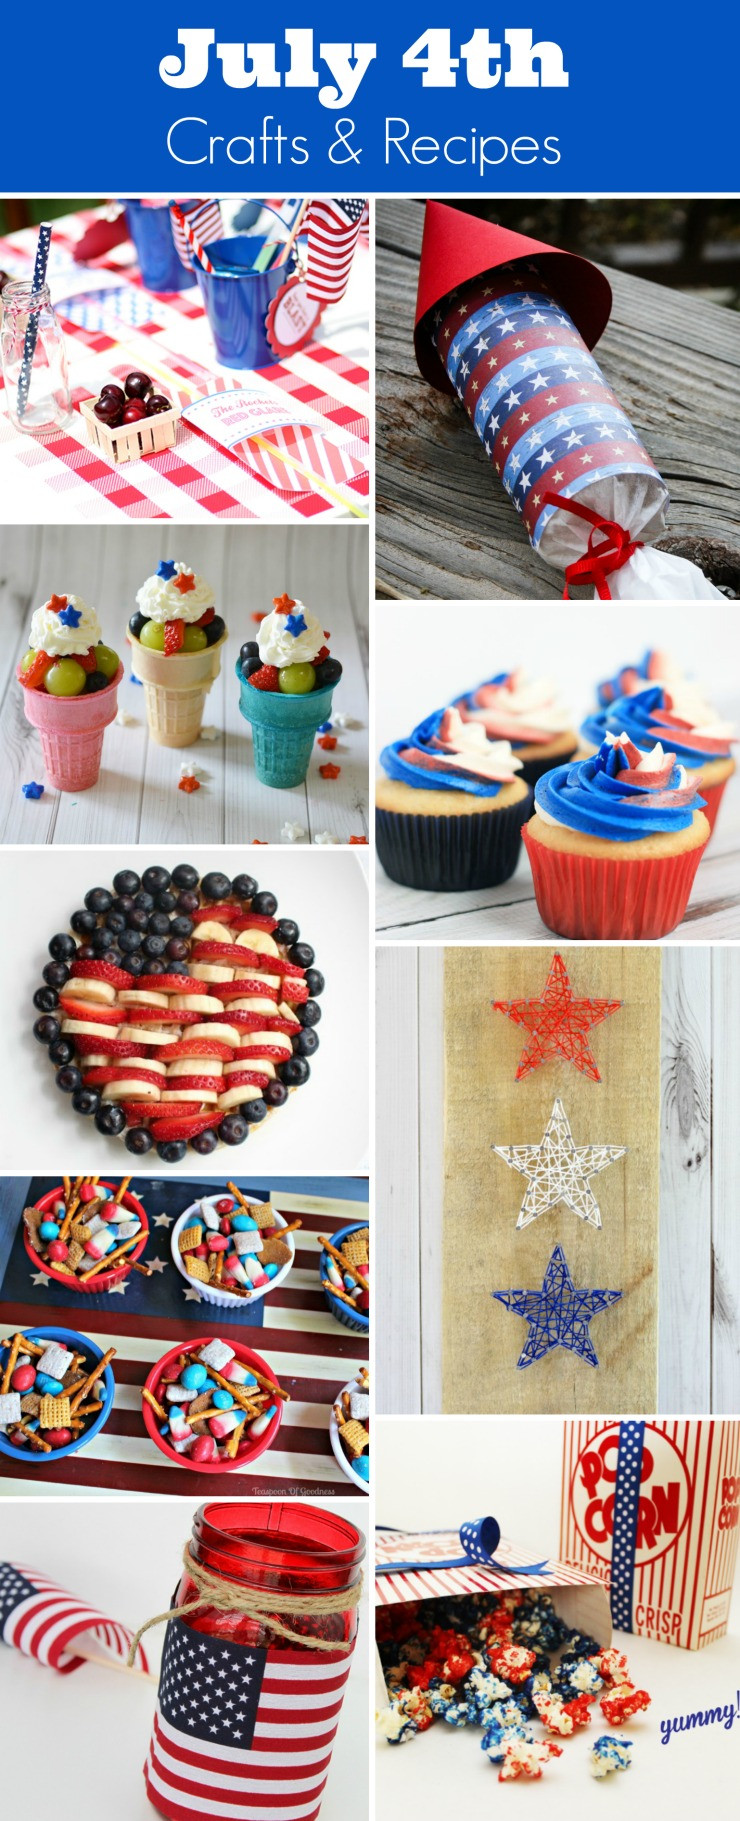 4th Of July Food Ideas Pinterest
 25 Ideas For 4th July Crafts And Recipes